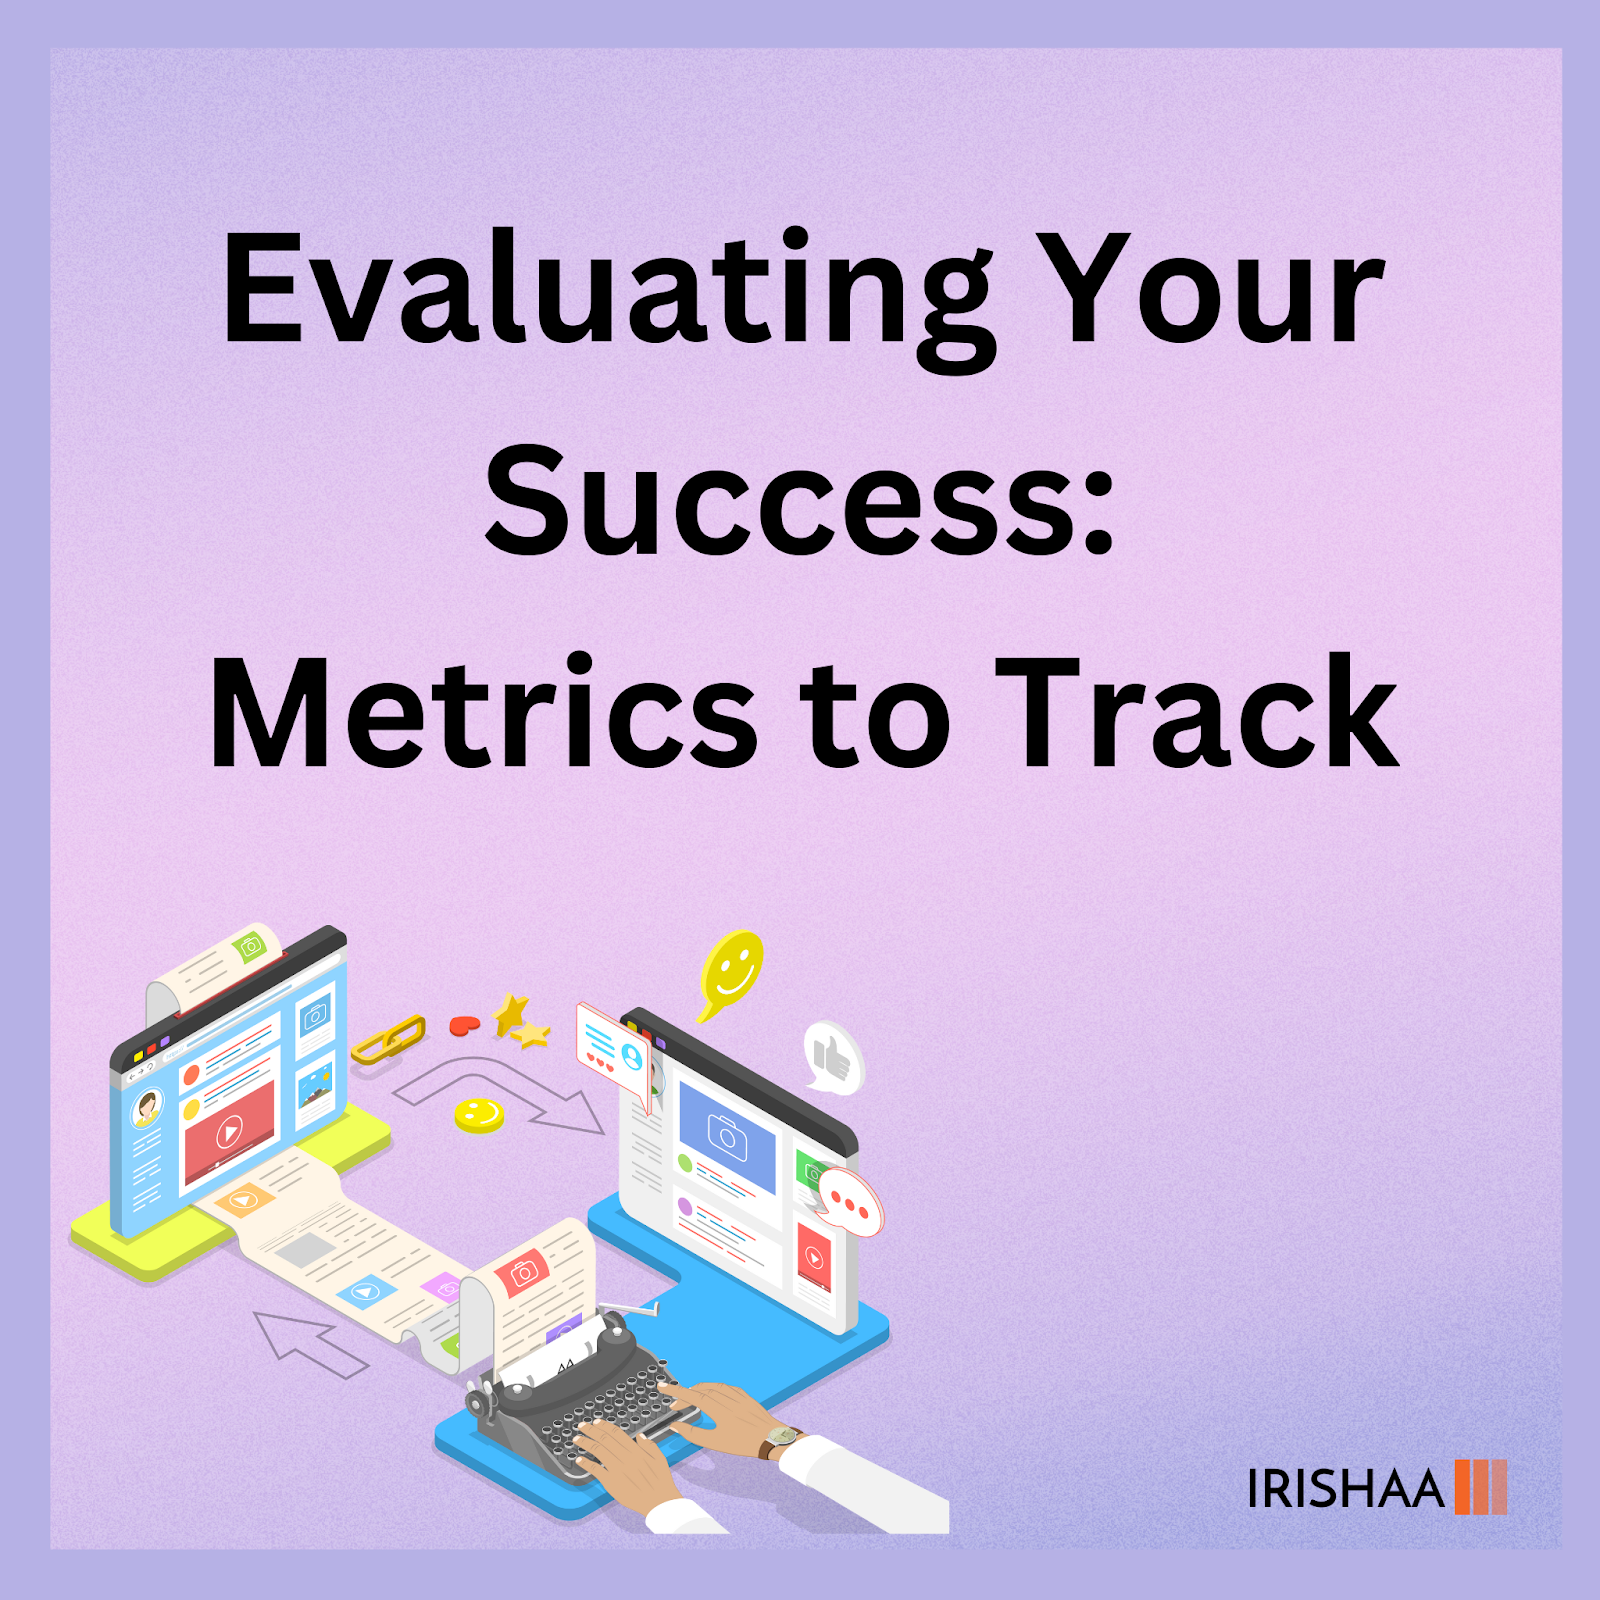 Evaluating Your Success: Metrics to Track
